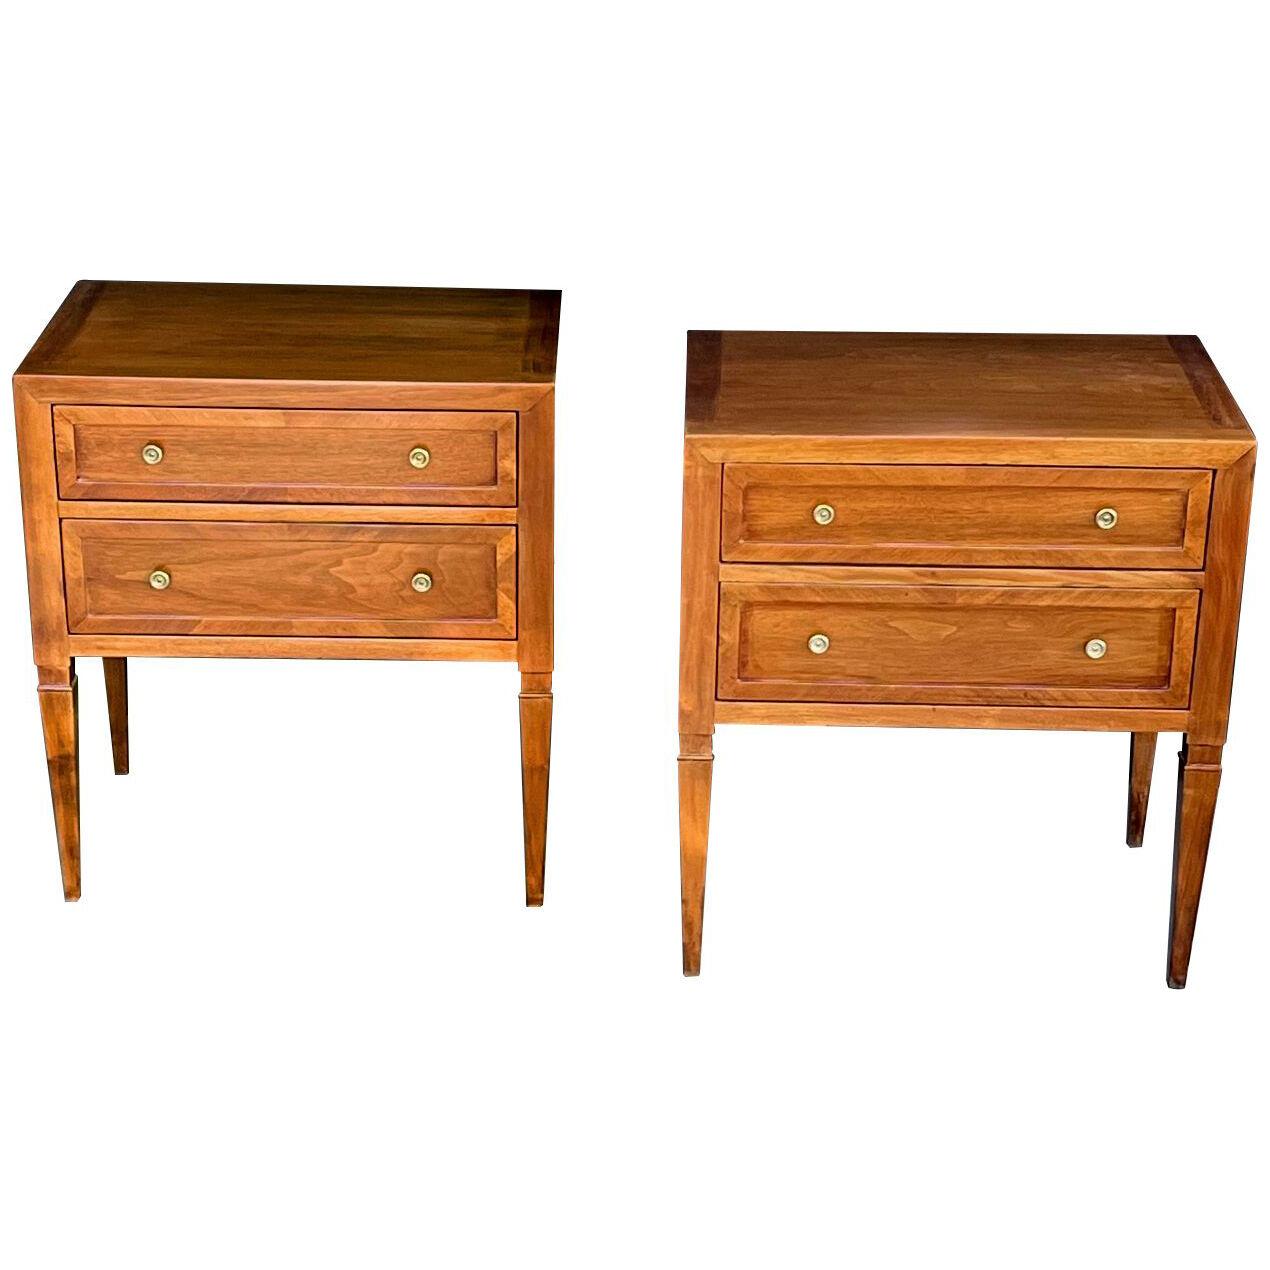 Good quality pair of John Stuart 1960's cherrywood 2-drawer bedside chests